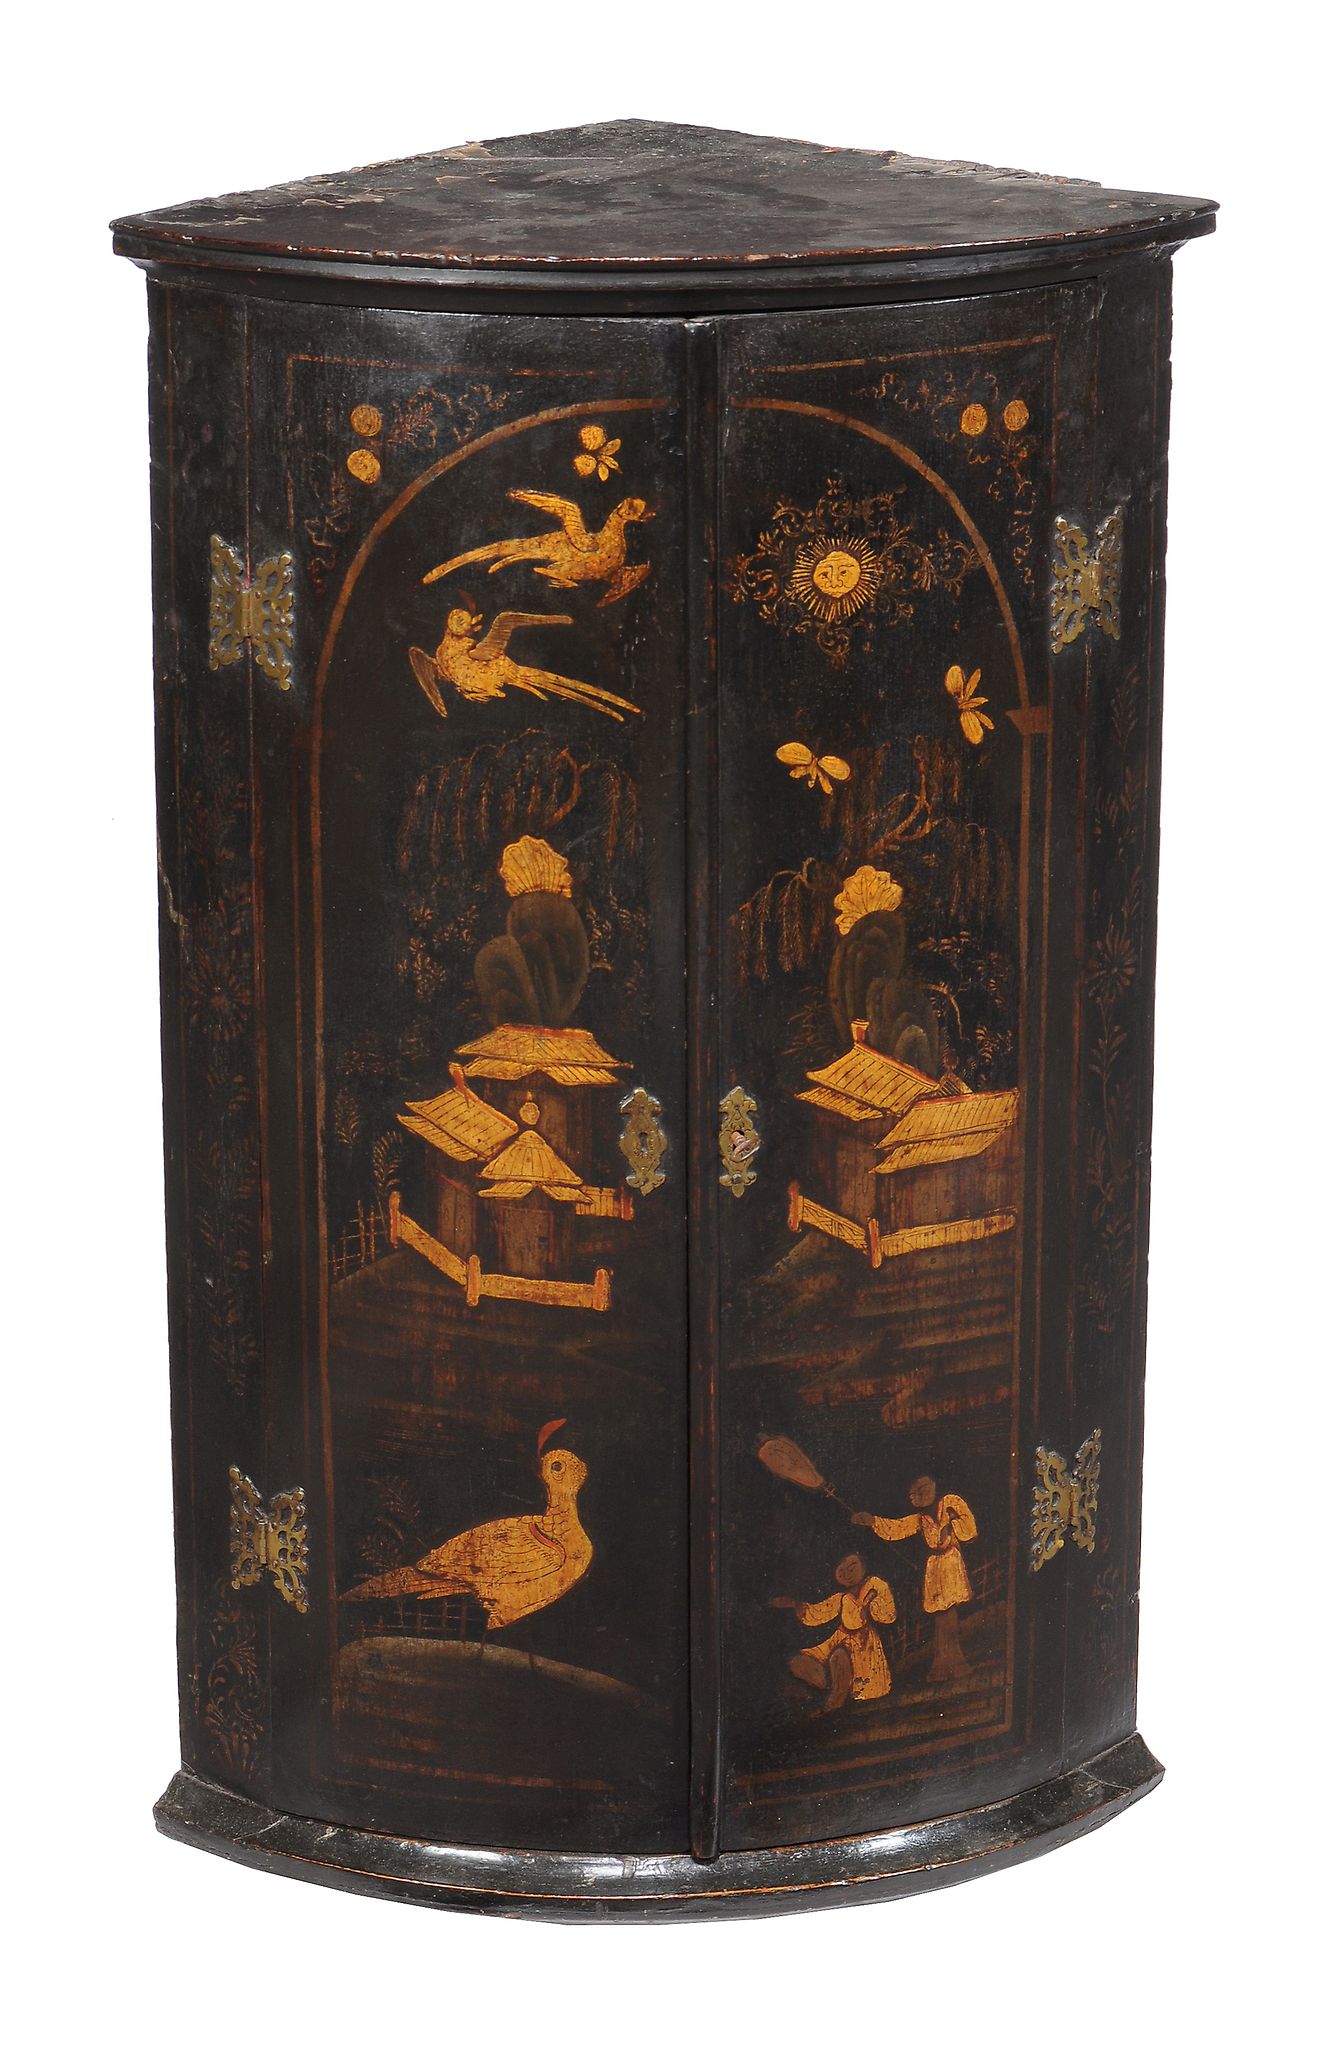 A George II black lacquer and gilt chinoiserie decorated hanging corner cupboard , circa 1740, of